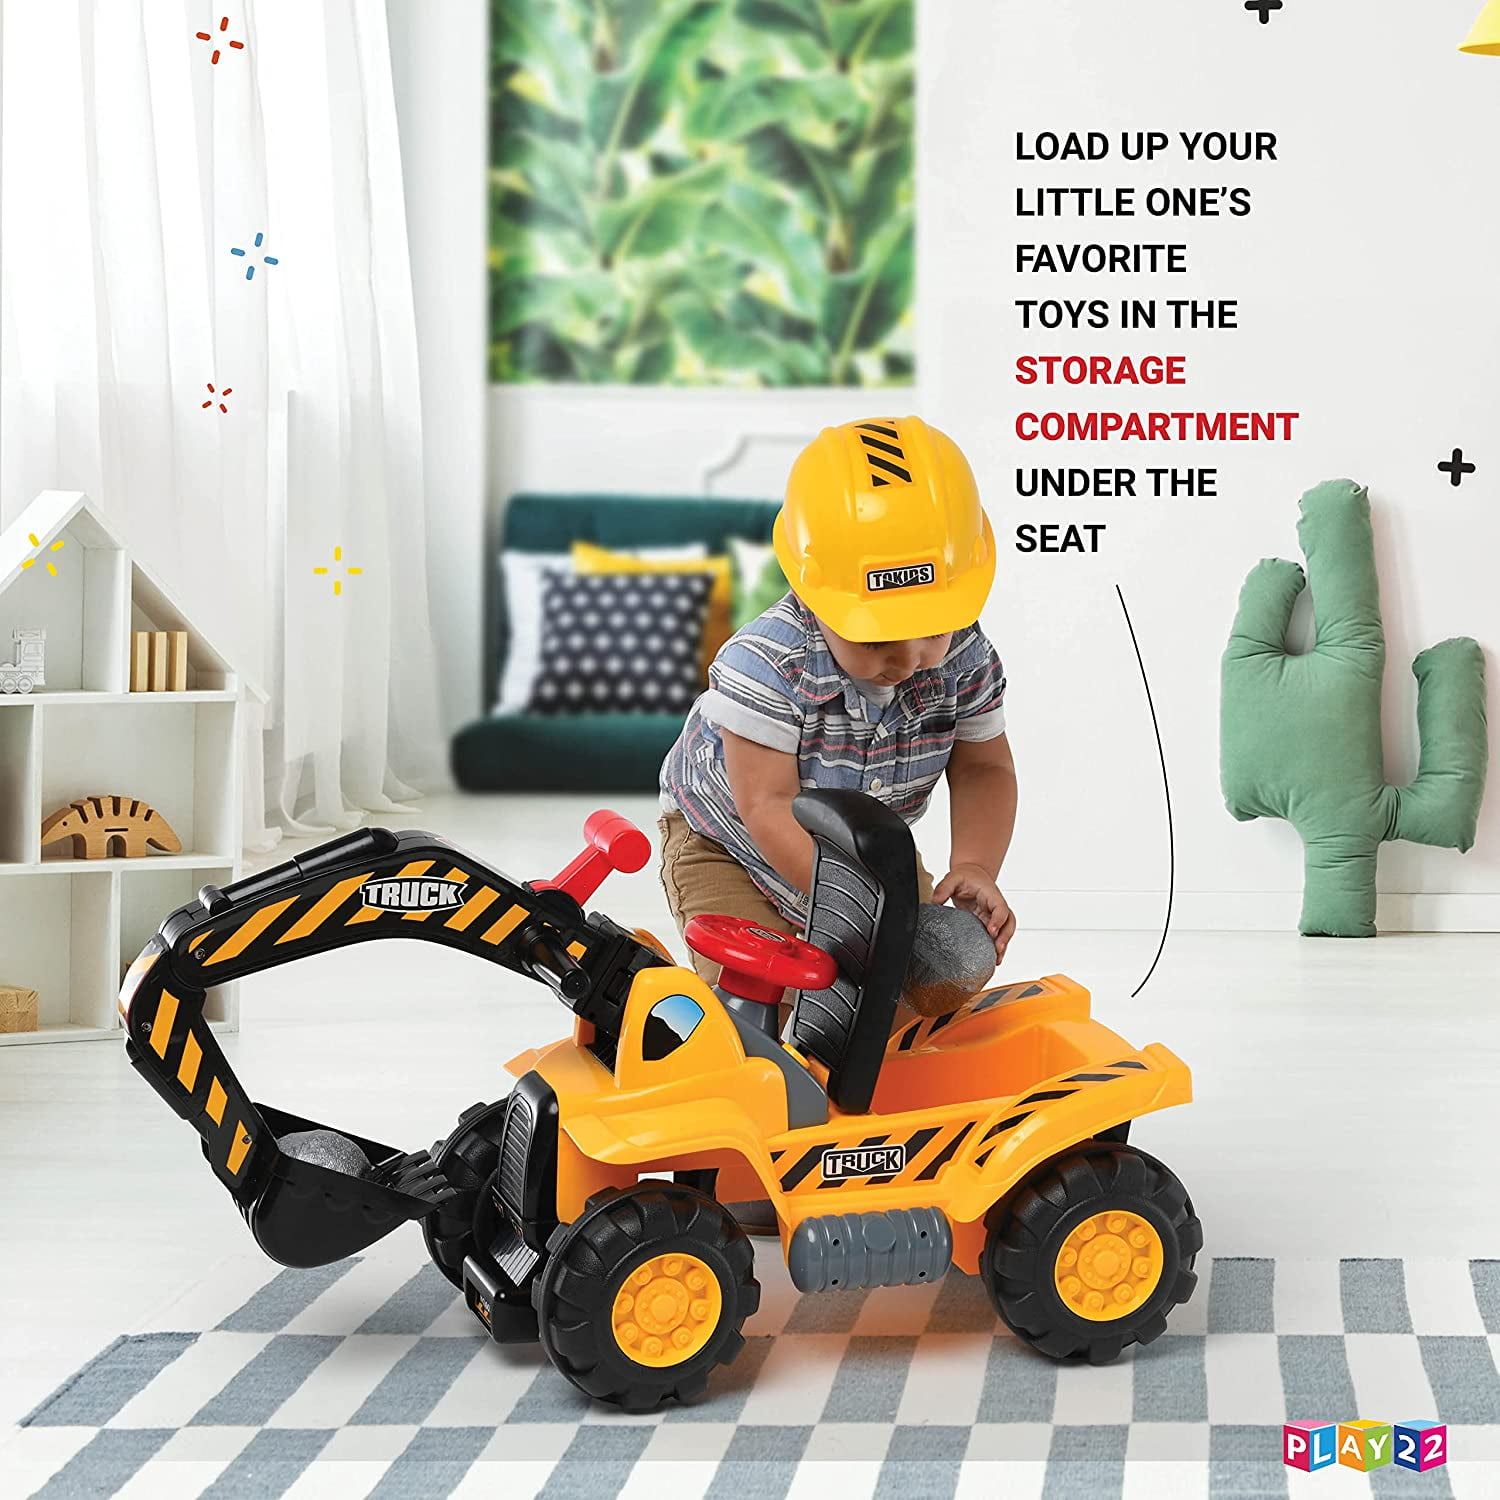 In Ride On Excavator Toy Pulling Cart Pretend Play